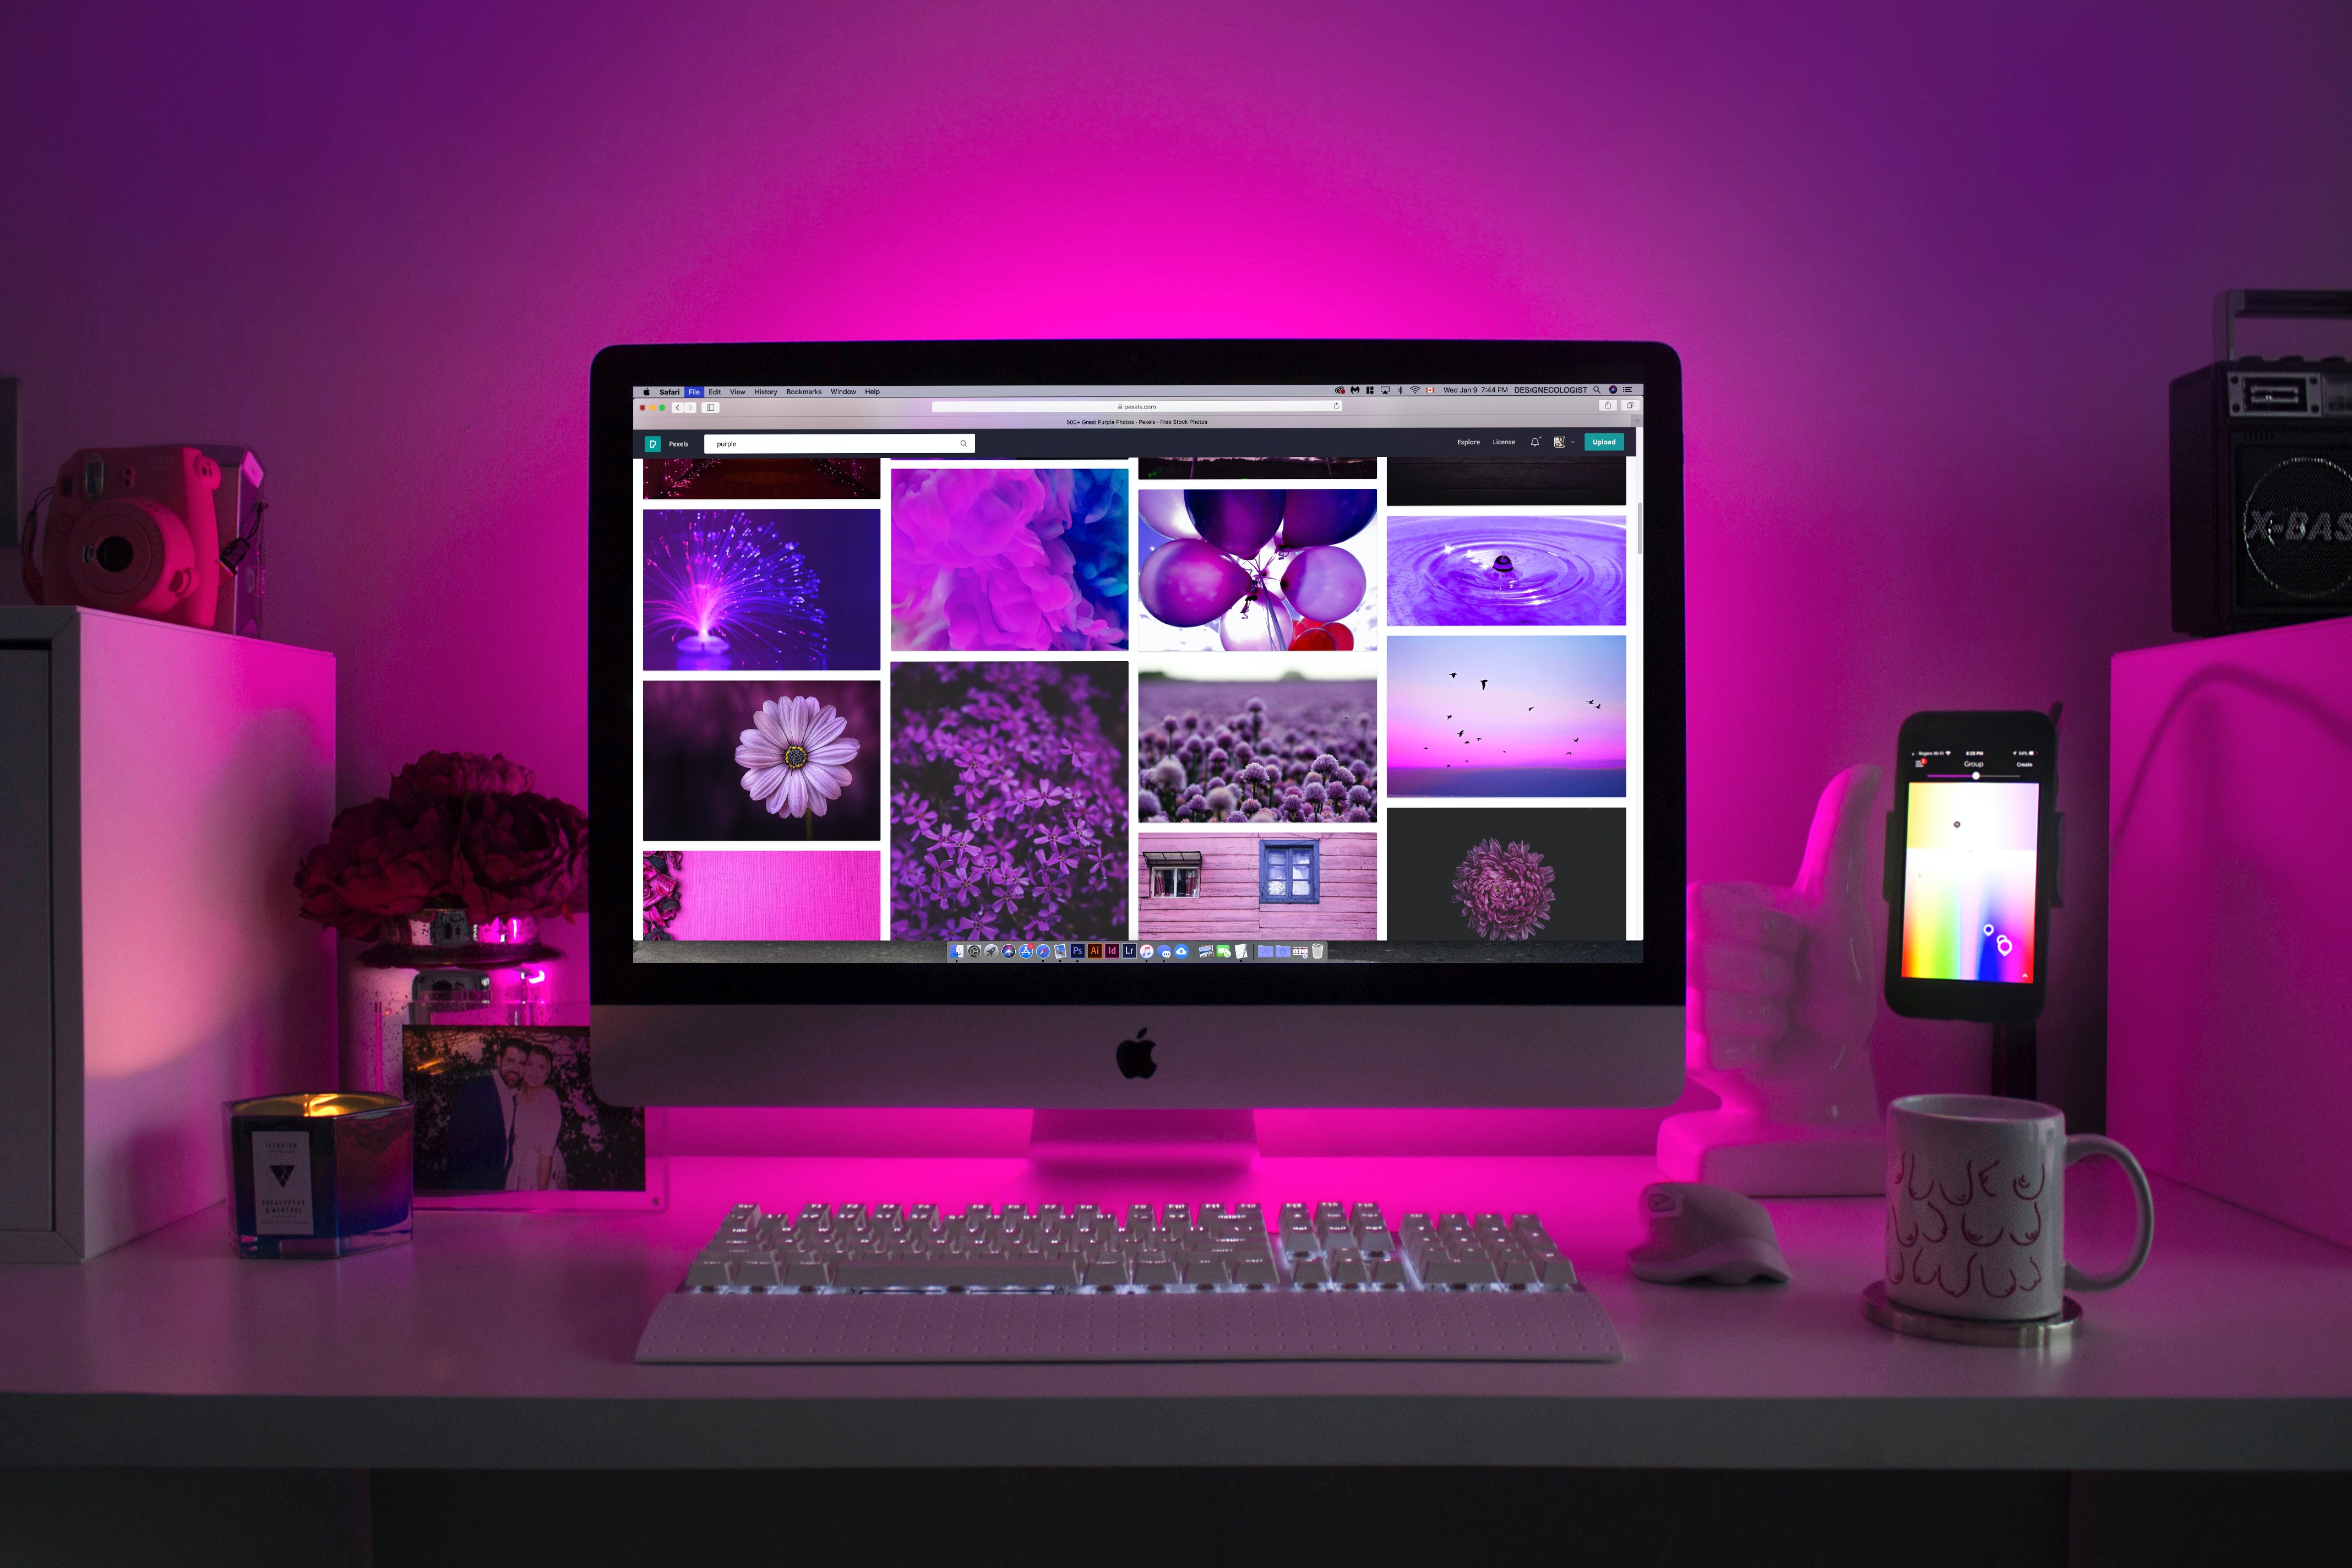 Apple Desktop computer and keyboard on top of a desk with purple LED lights illuminating the room